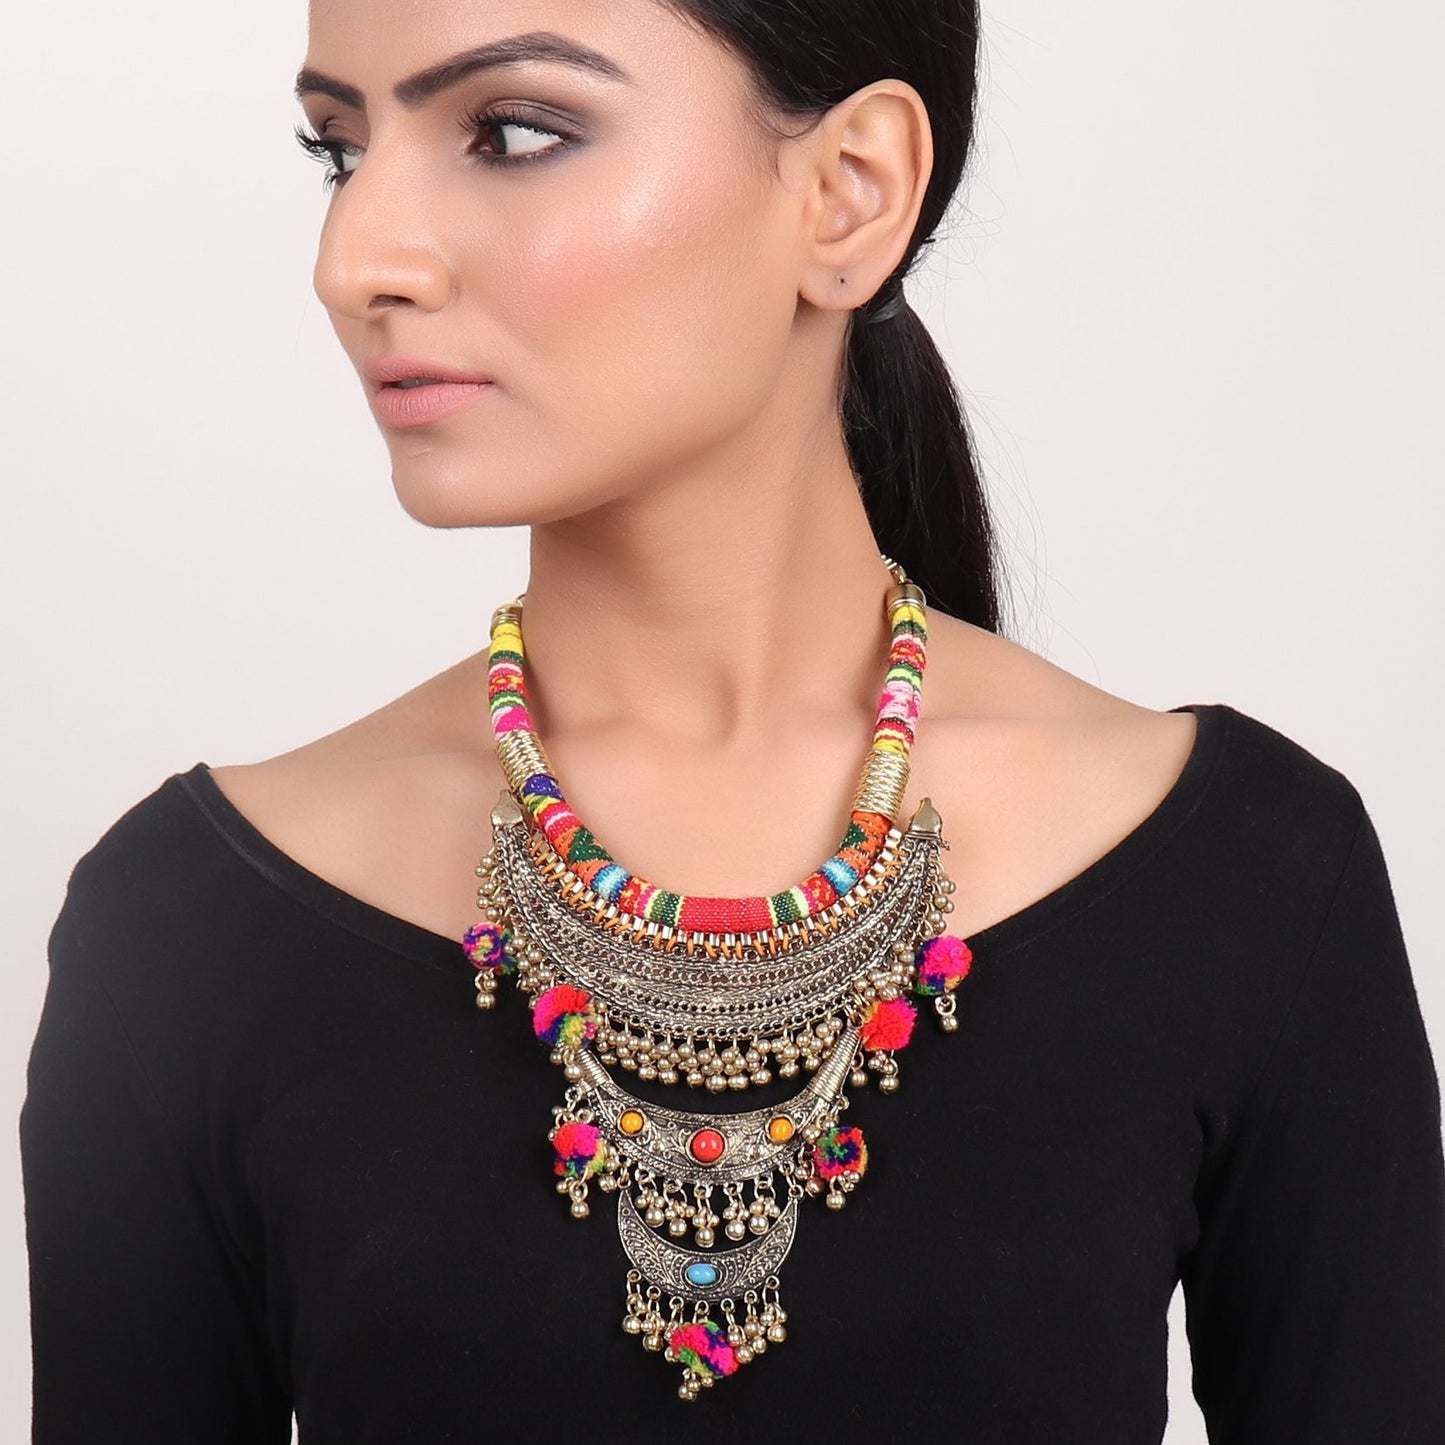 Necklace,Boho Statement Necklace in Golden - Cippele Multi Store